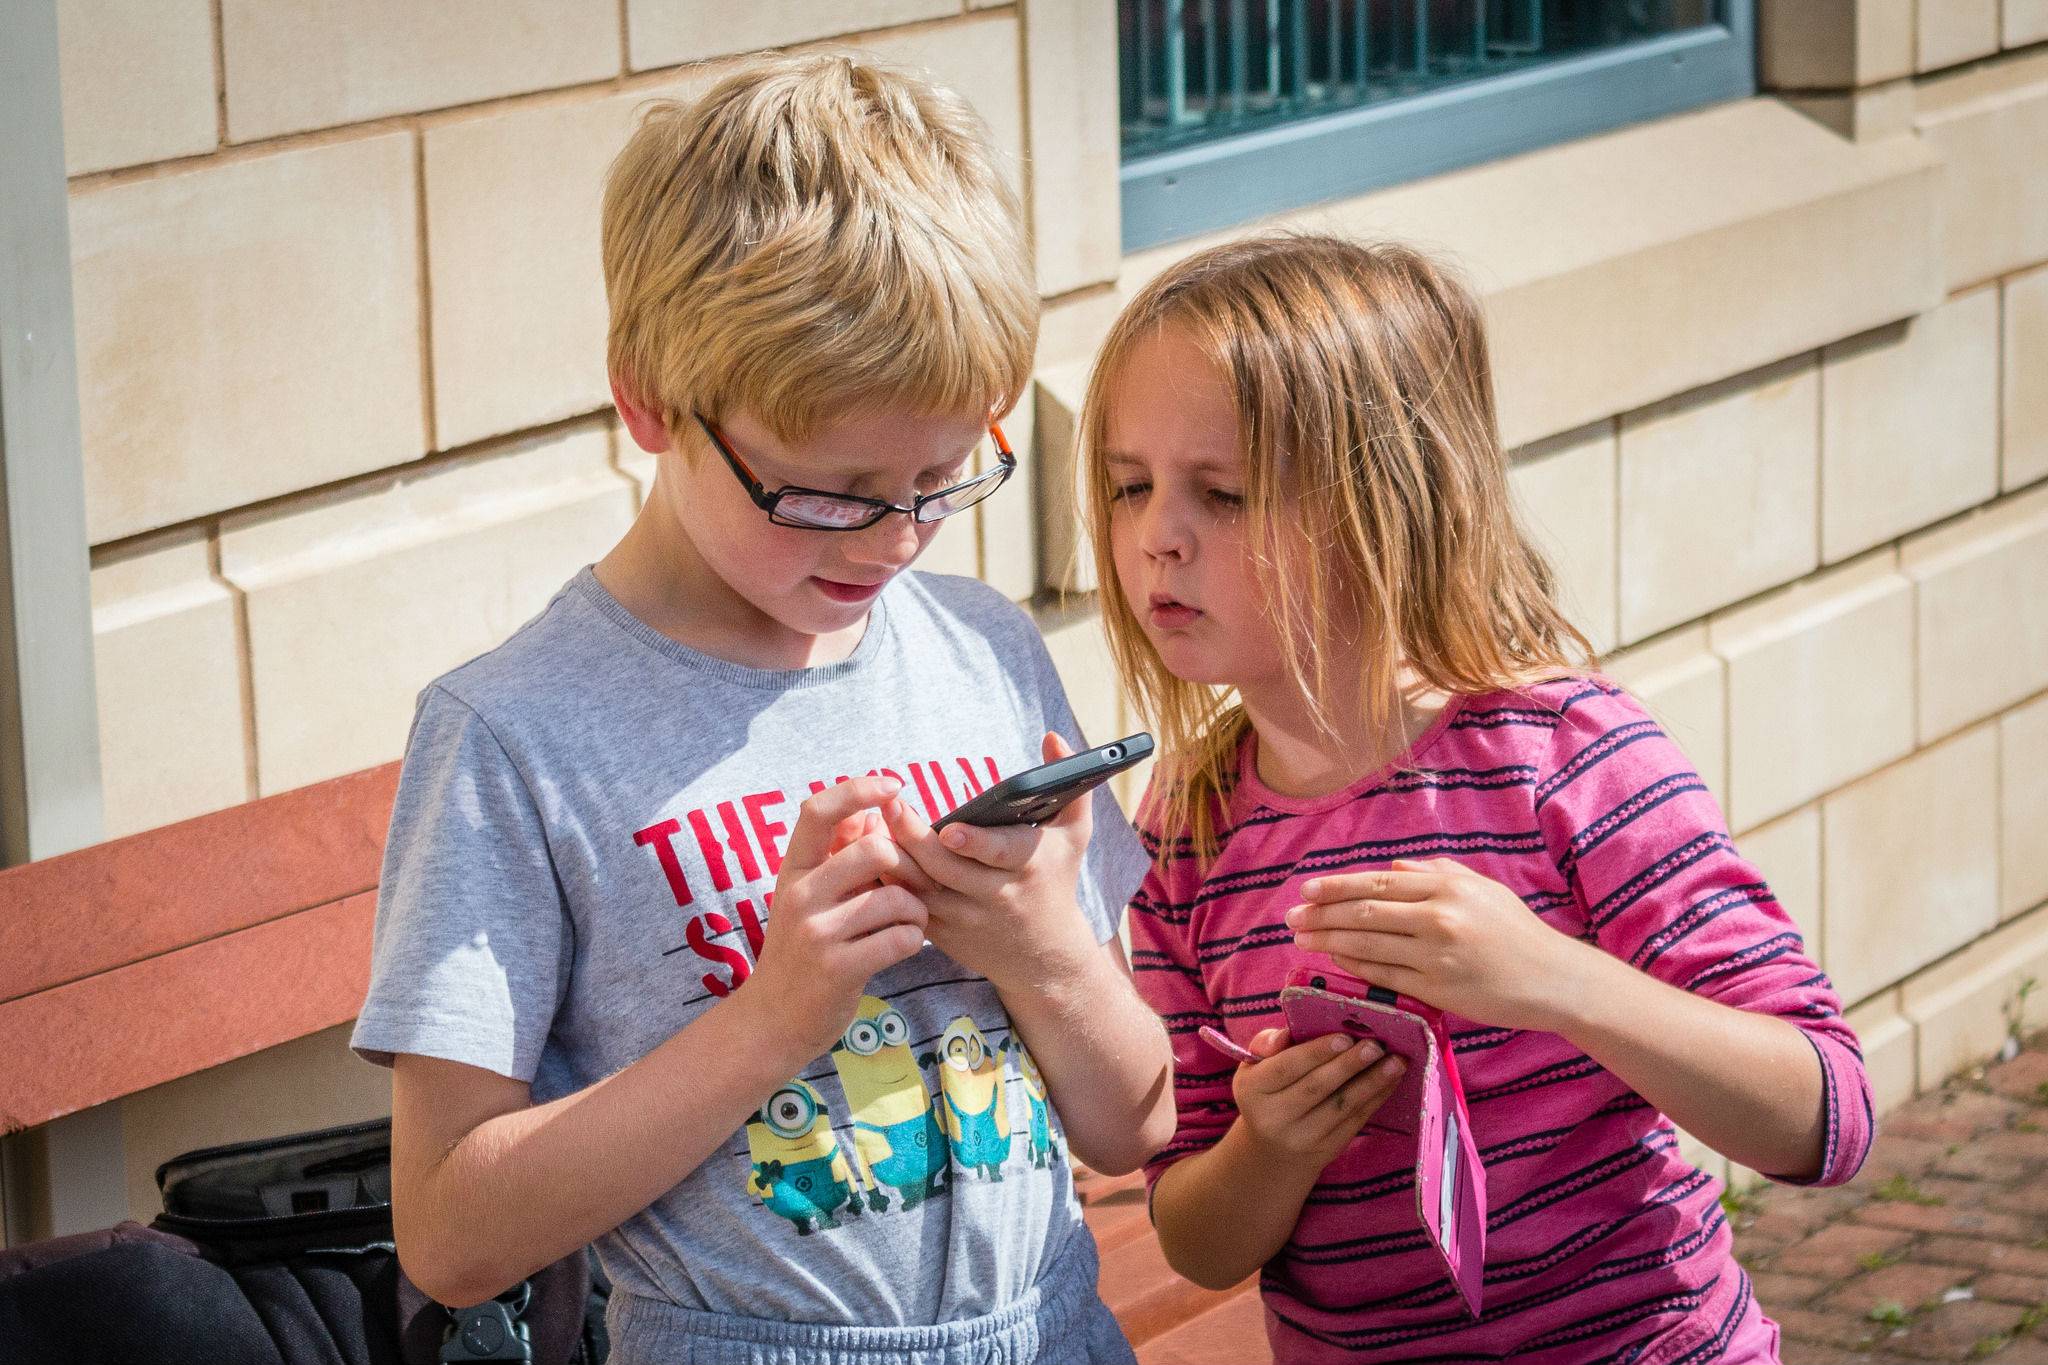 Kids make in-app purchases without permission